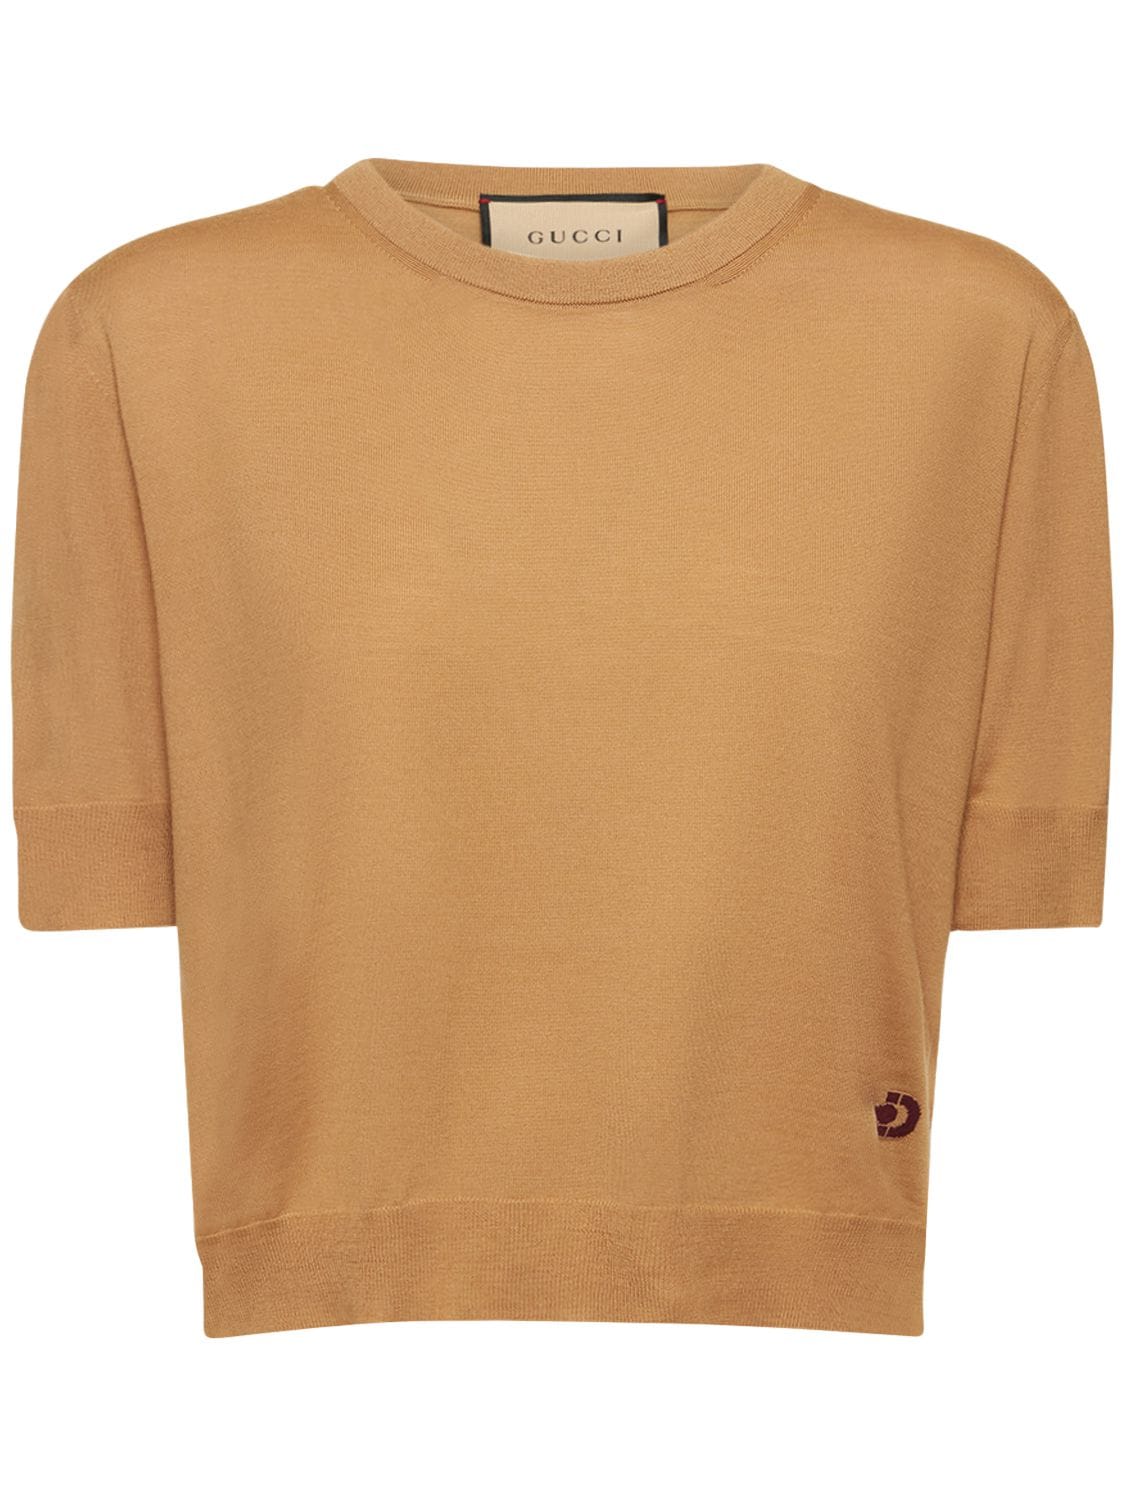 Gucci Wool Top In Camel